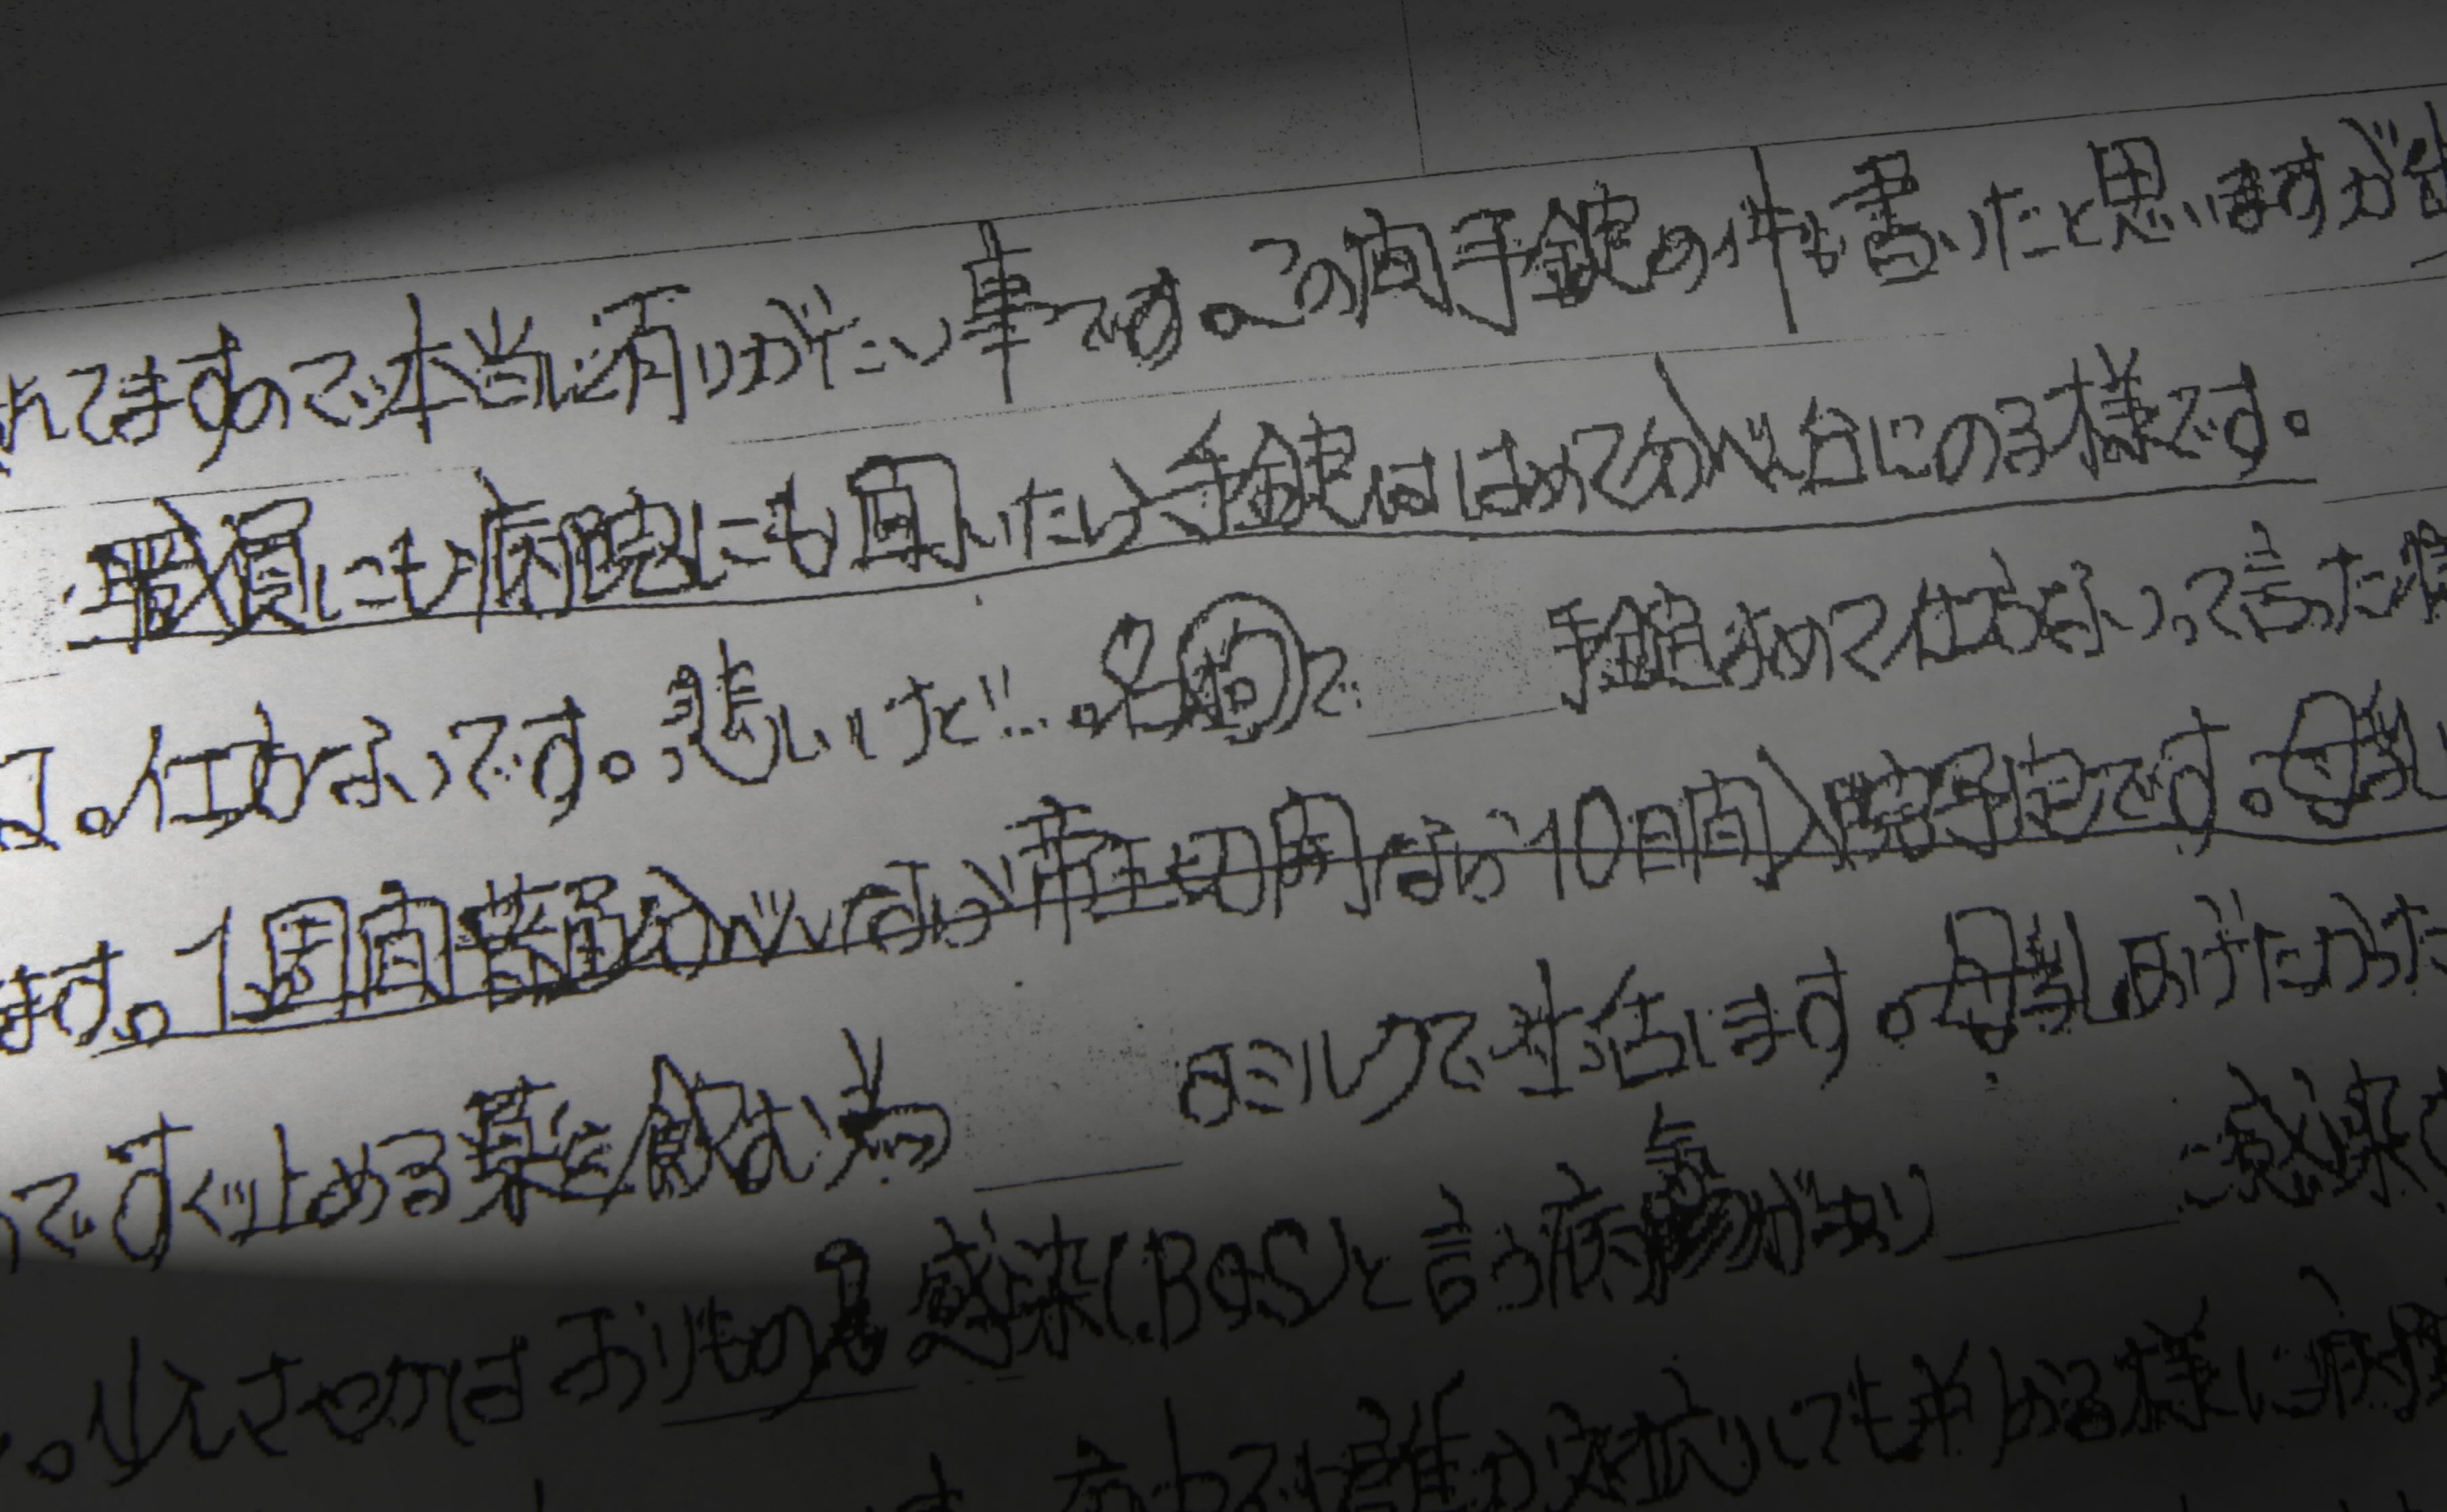 A pregnant woman wrote this letter describing her dismay at having to give birth while chained. Her partner lobbied against it, and policy is now changing as a result. | CHUNICHI SHIMBUN